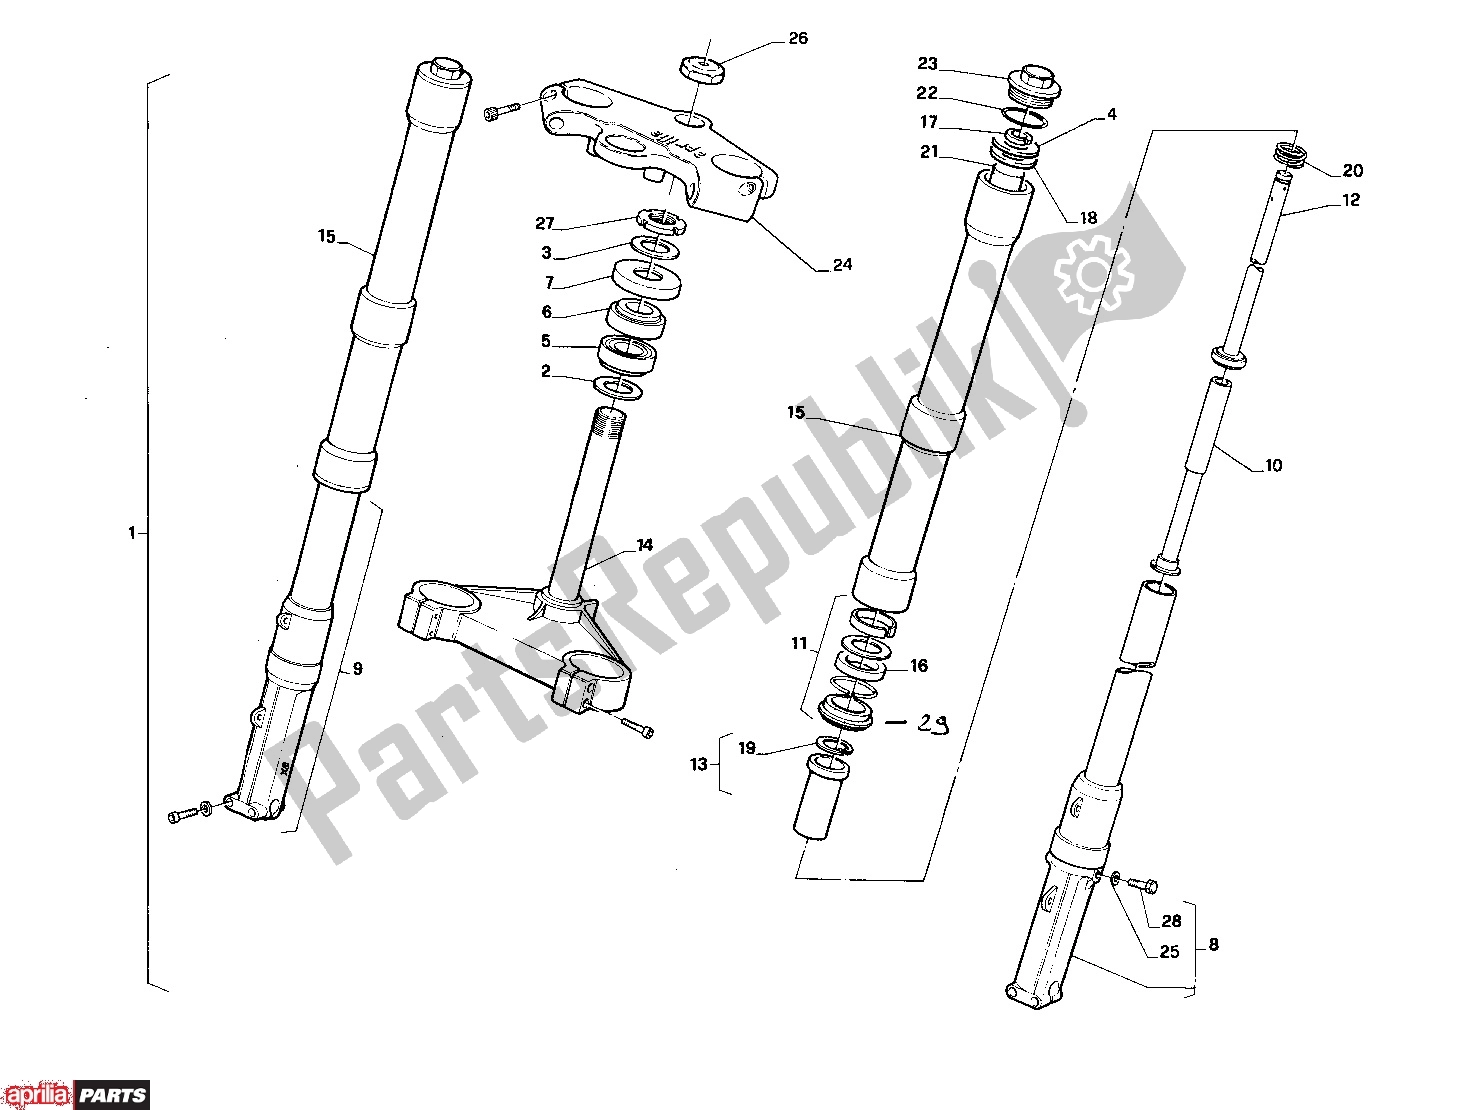 All parts for the Front Fork of the Aprilia AF1 312 125 1990 - 1995